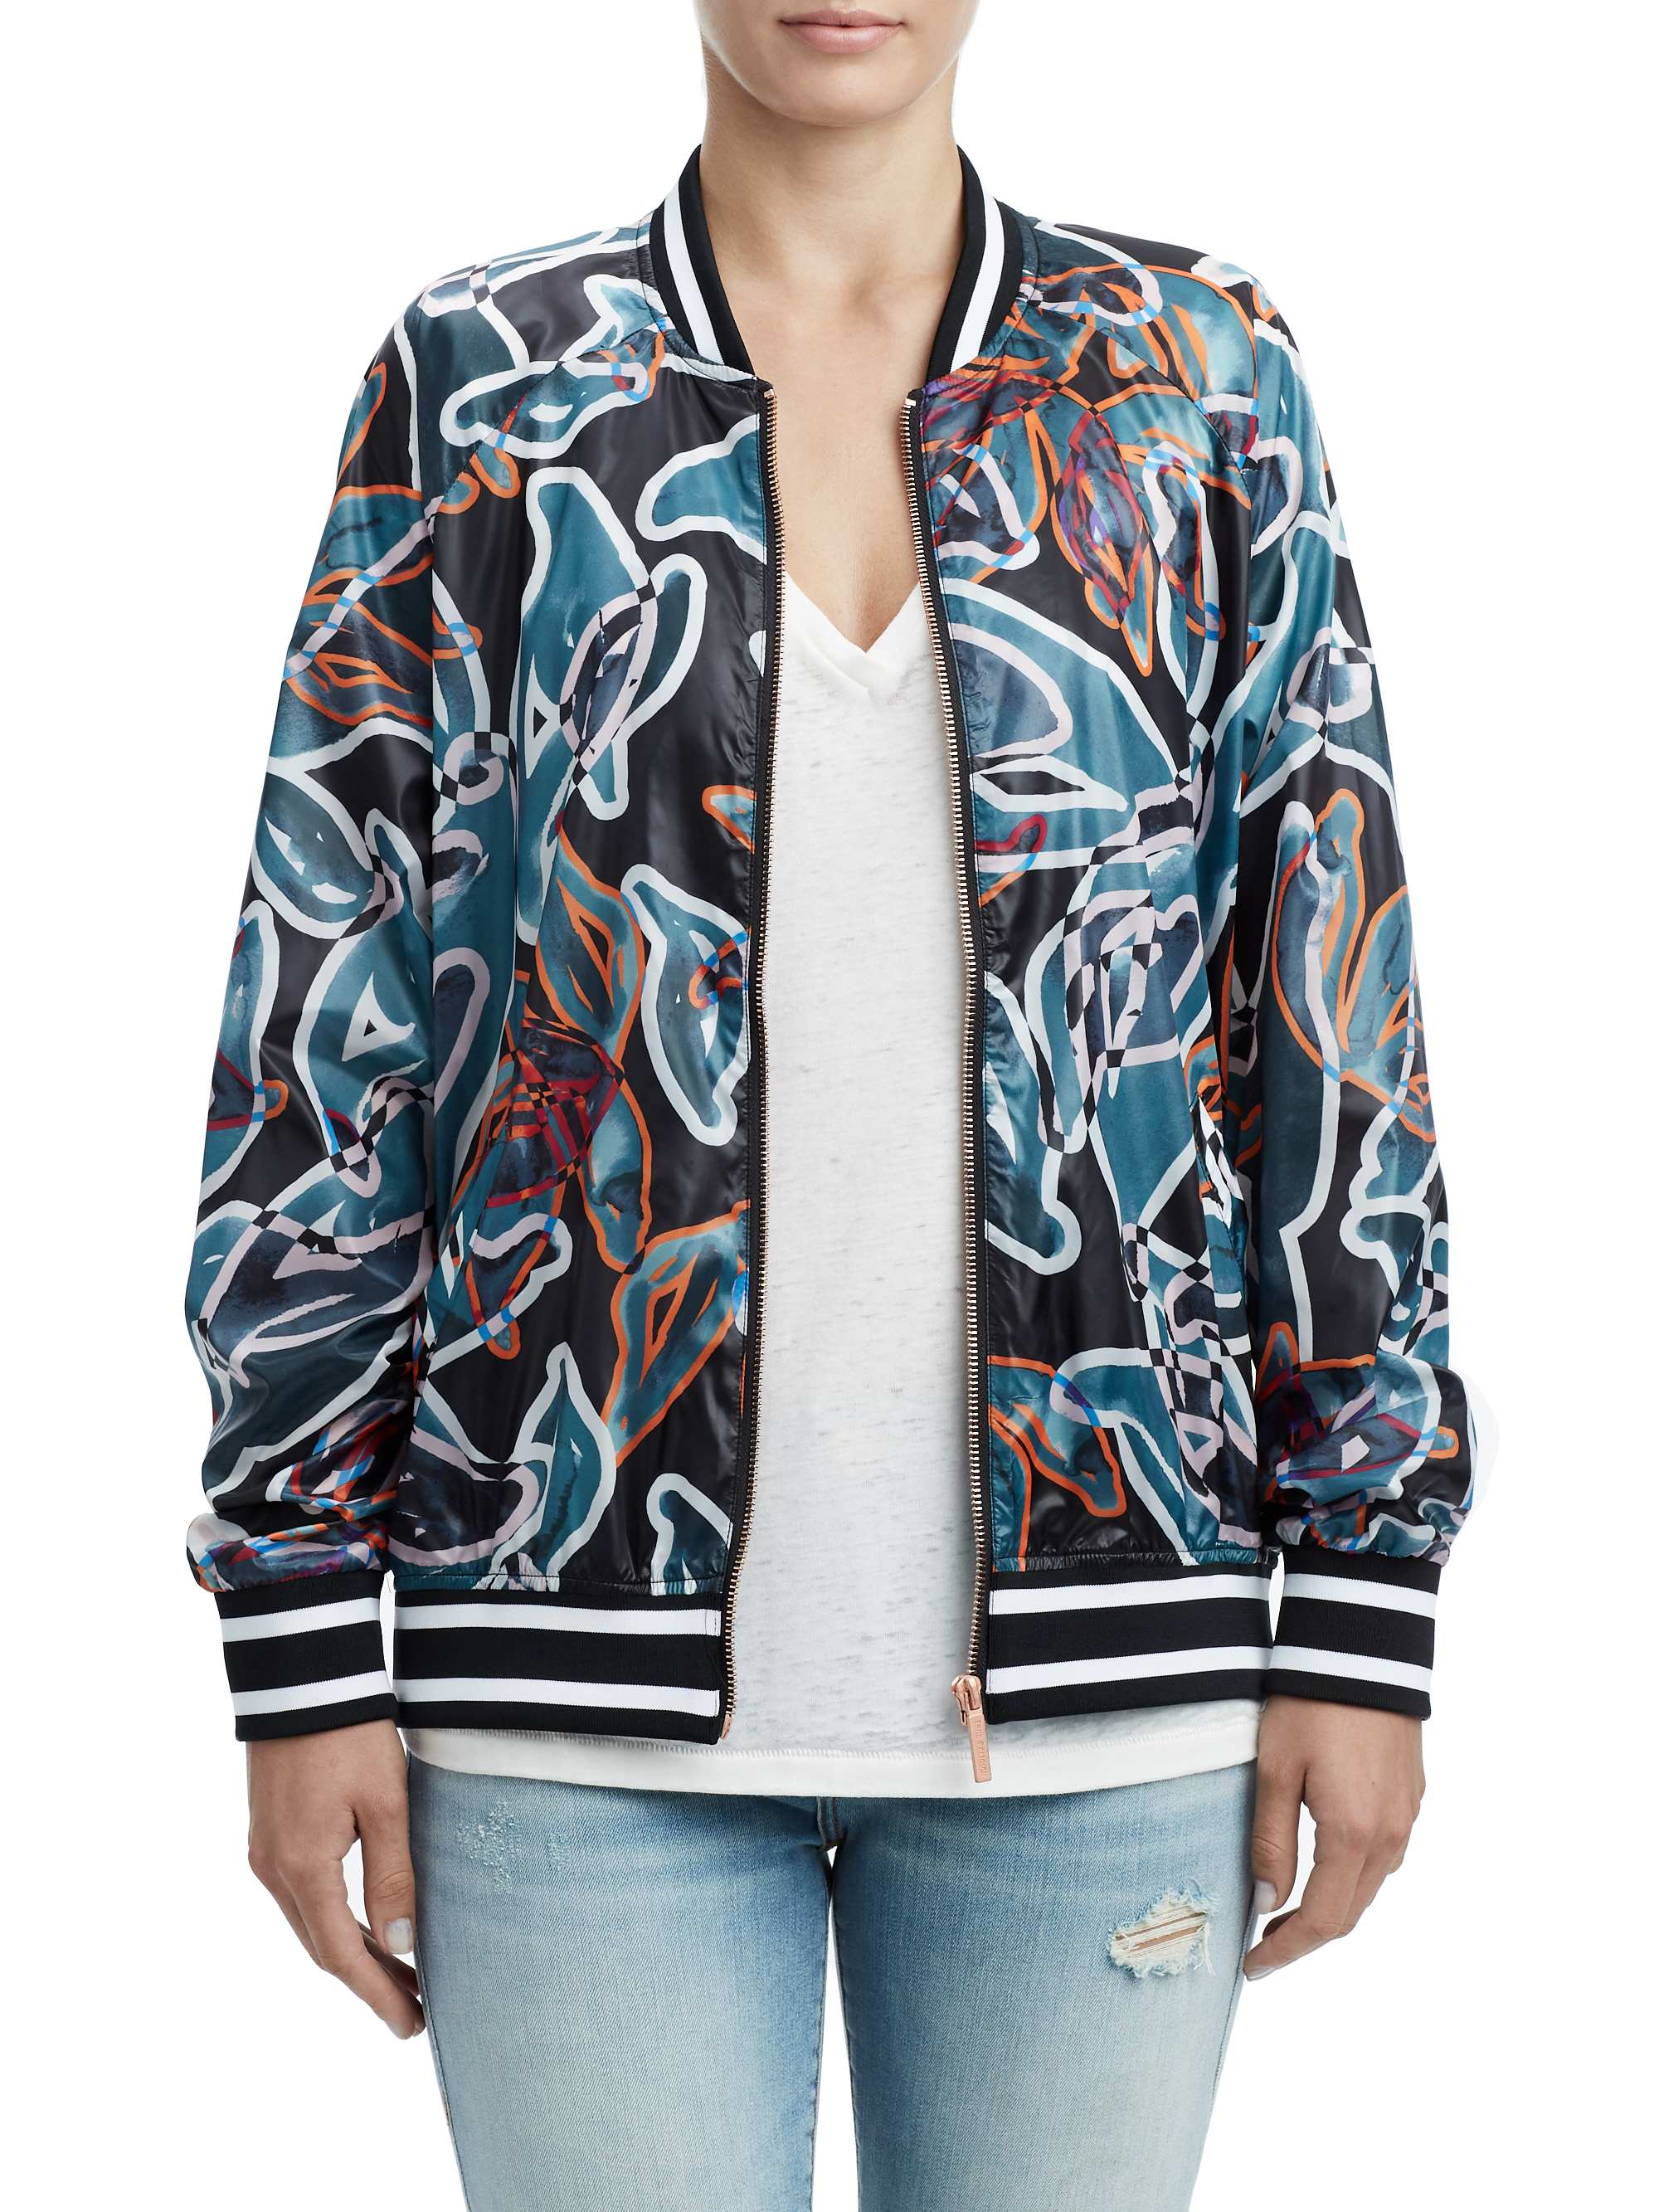 WOMENS TROPIC FLORAL BOMBER JACKET